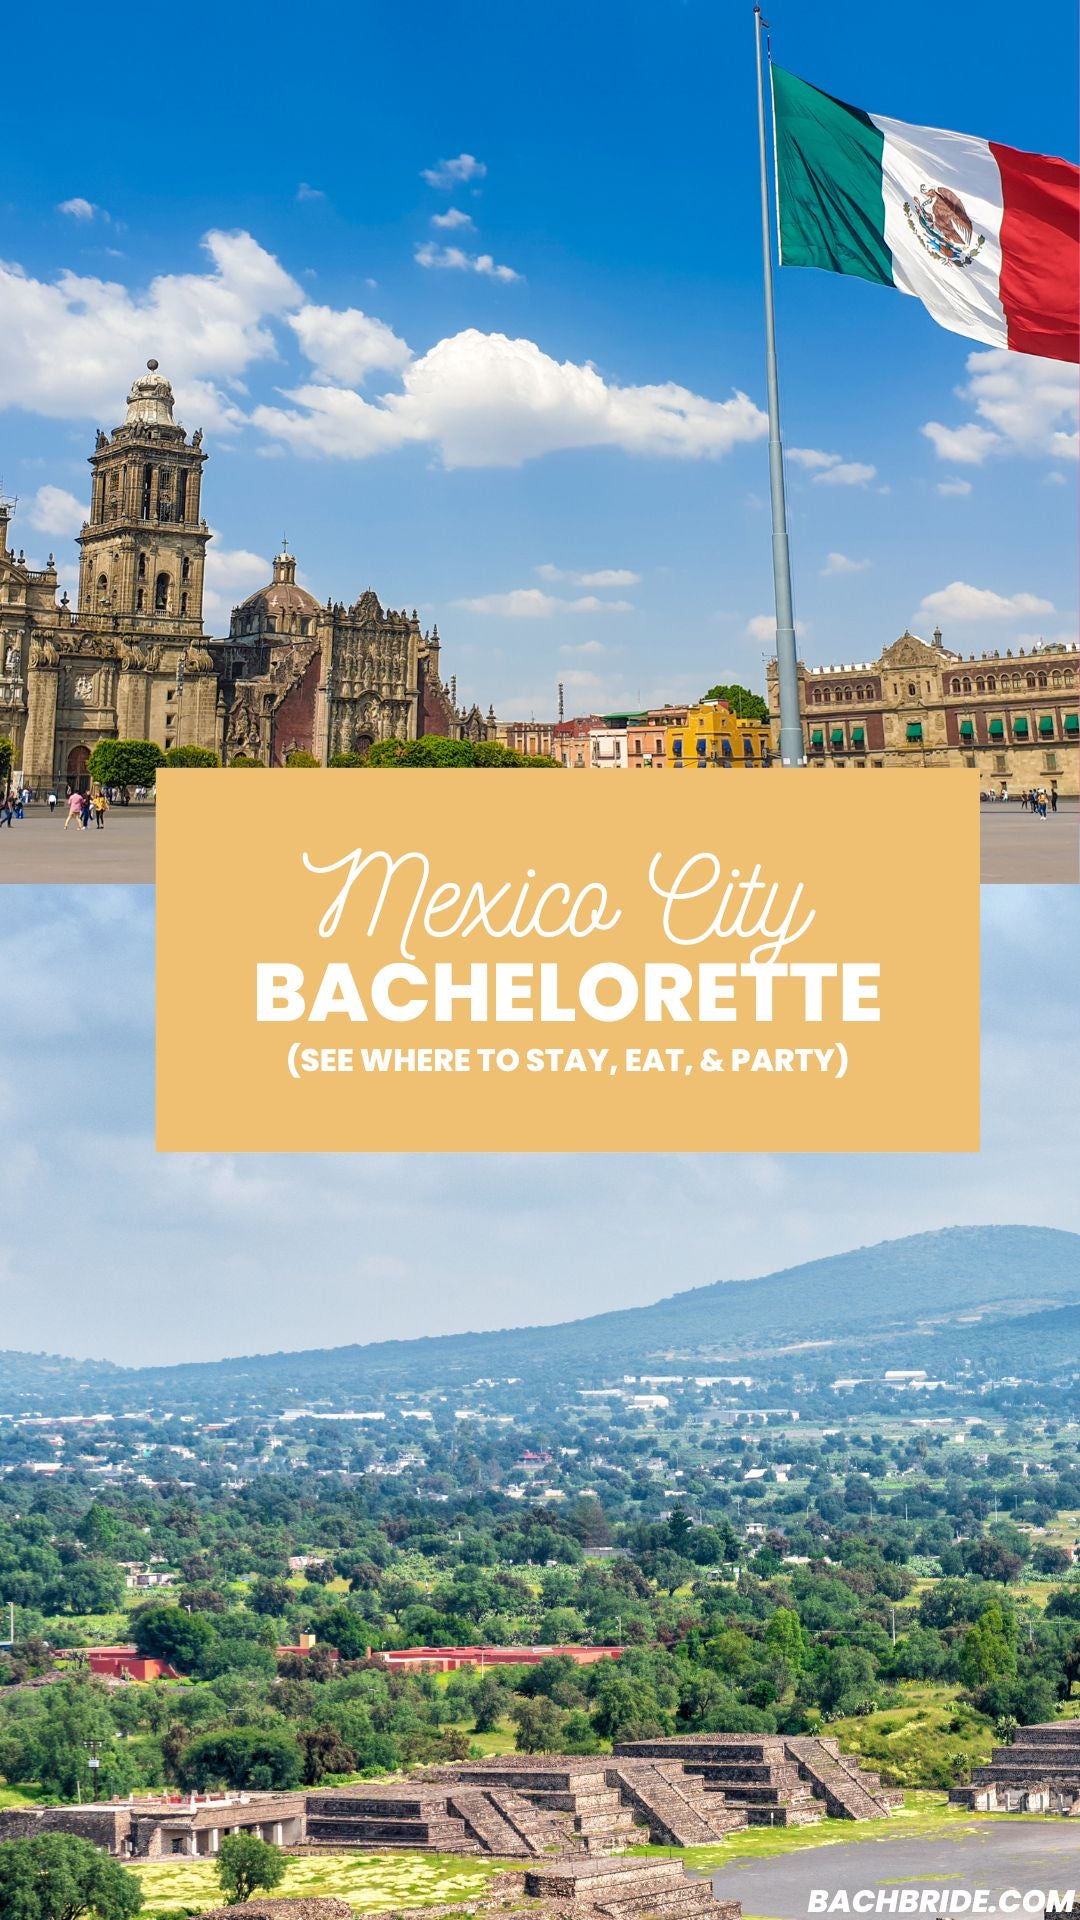 Mexico City Bachelorette Party: The Ultimate Guide